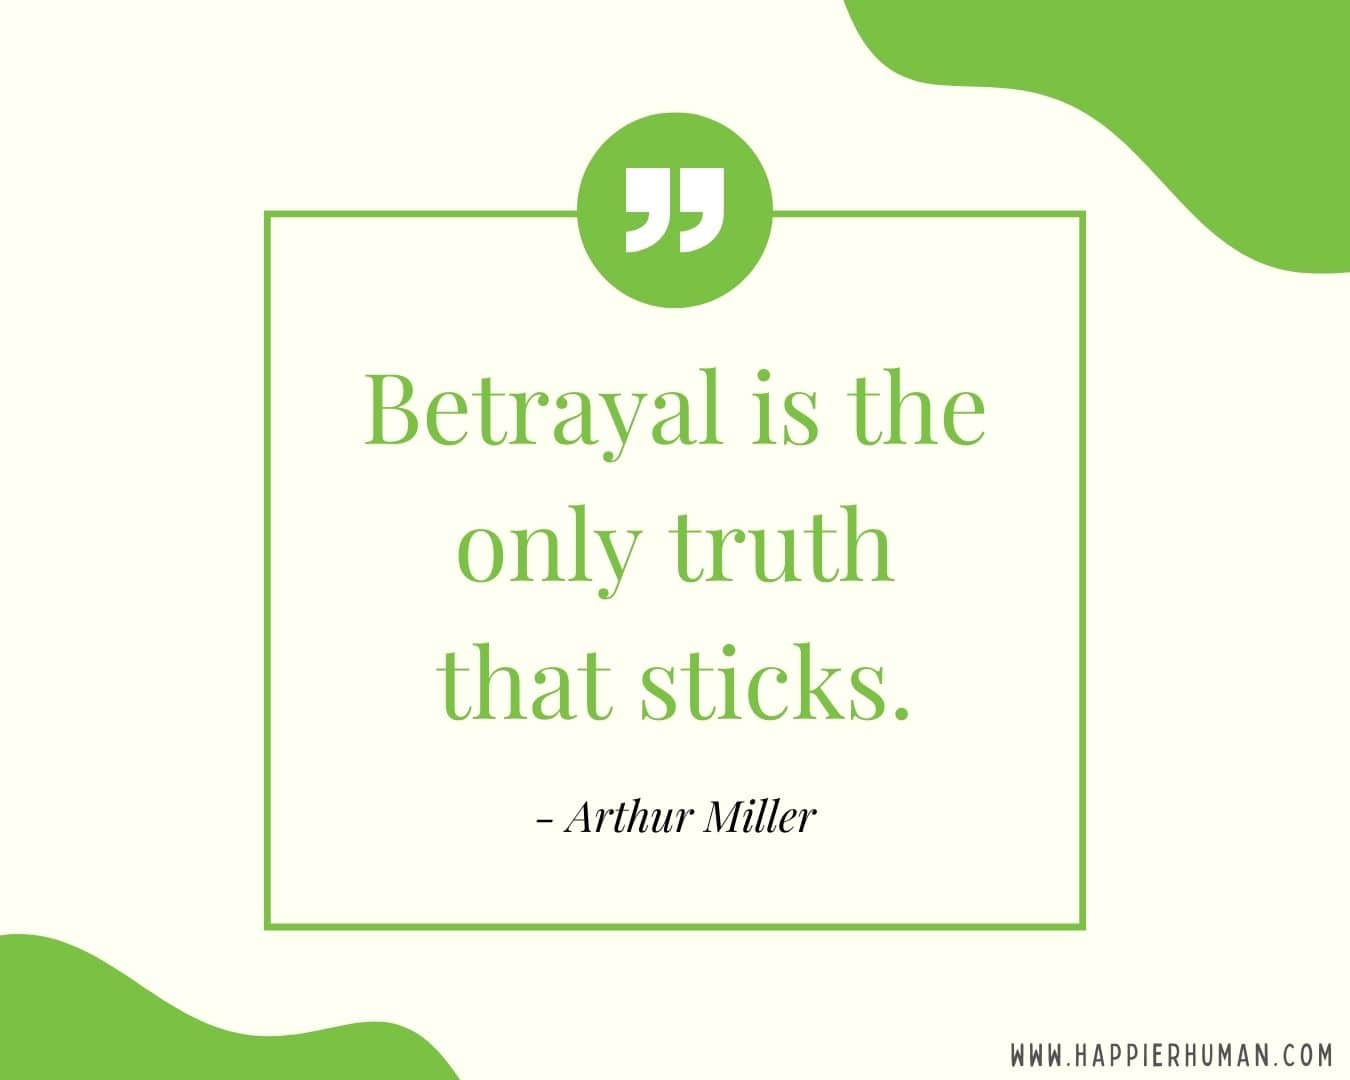 Broken Trust Quotes - “Betrayal is the only truth that sticks.” - Arthur Miller